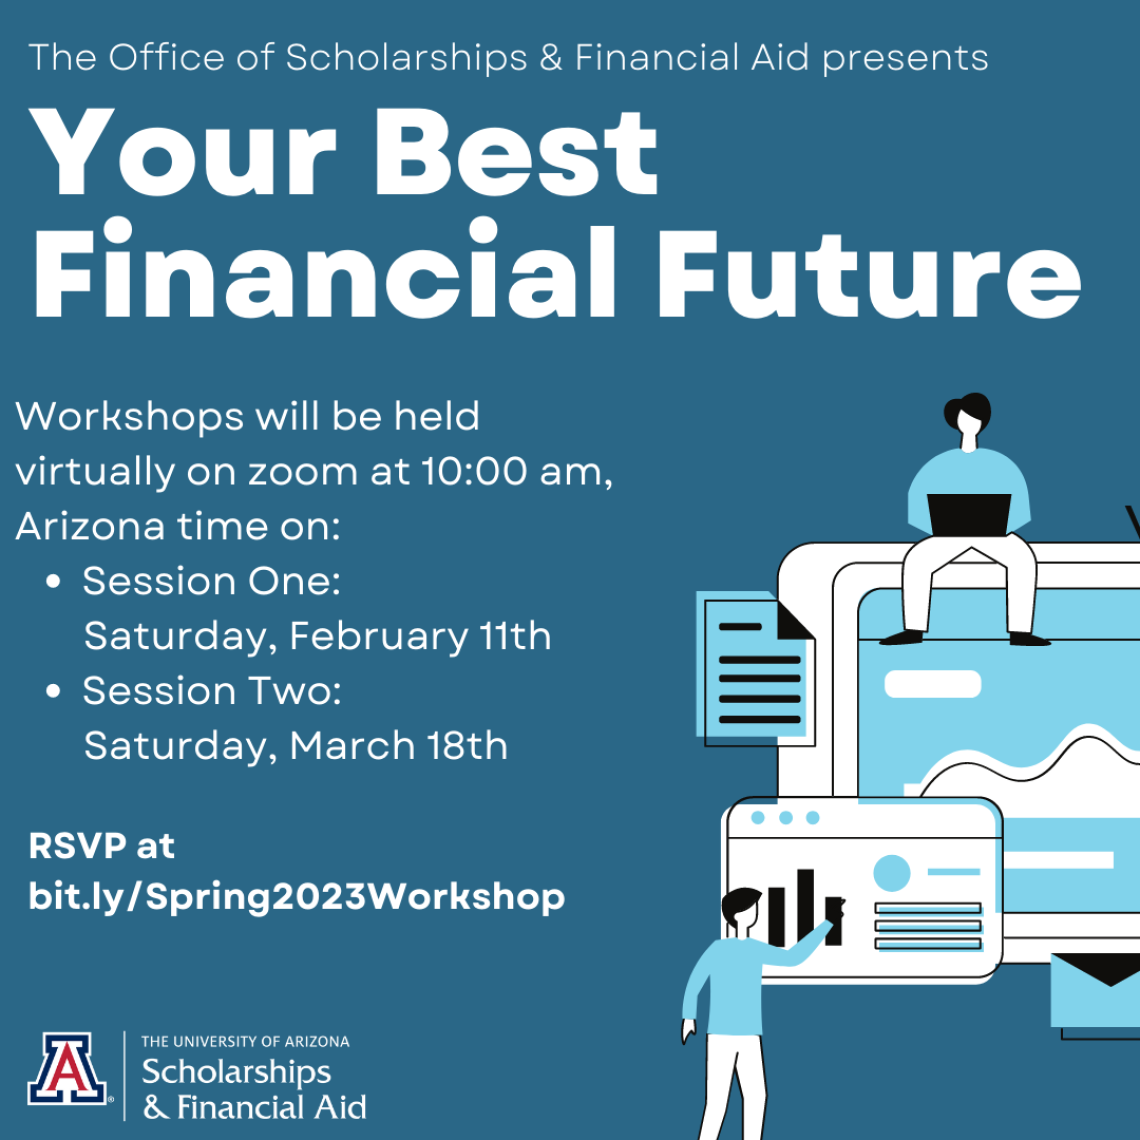 Your Best Financial Future flyers with dates and RSVP link